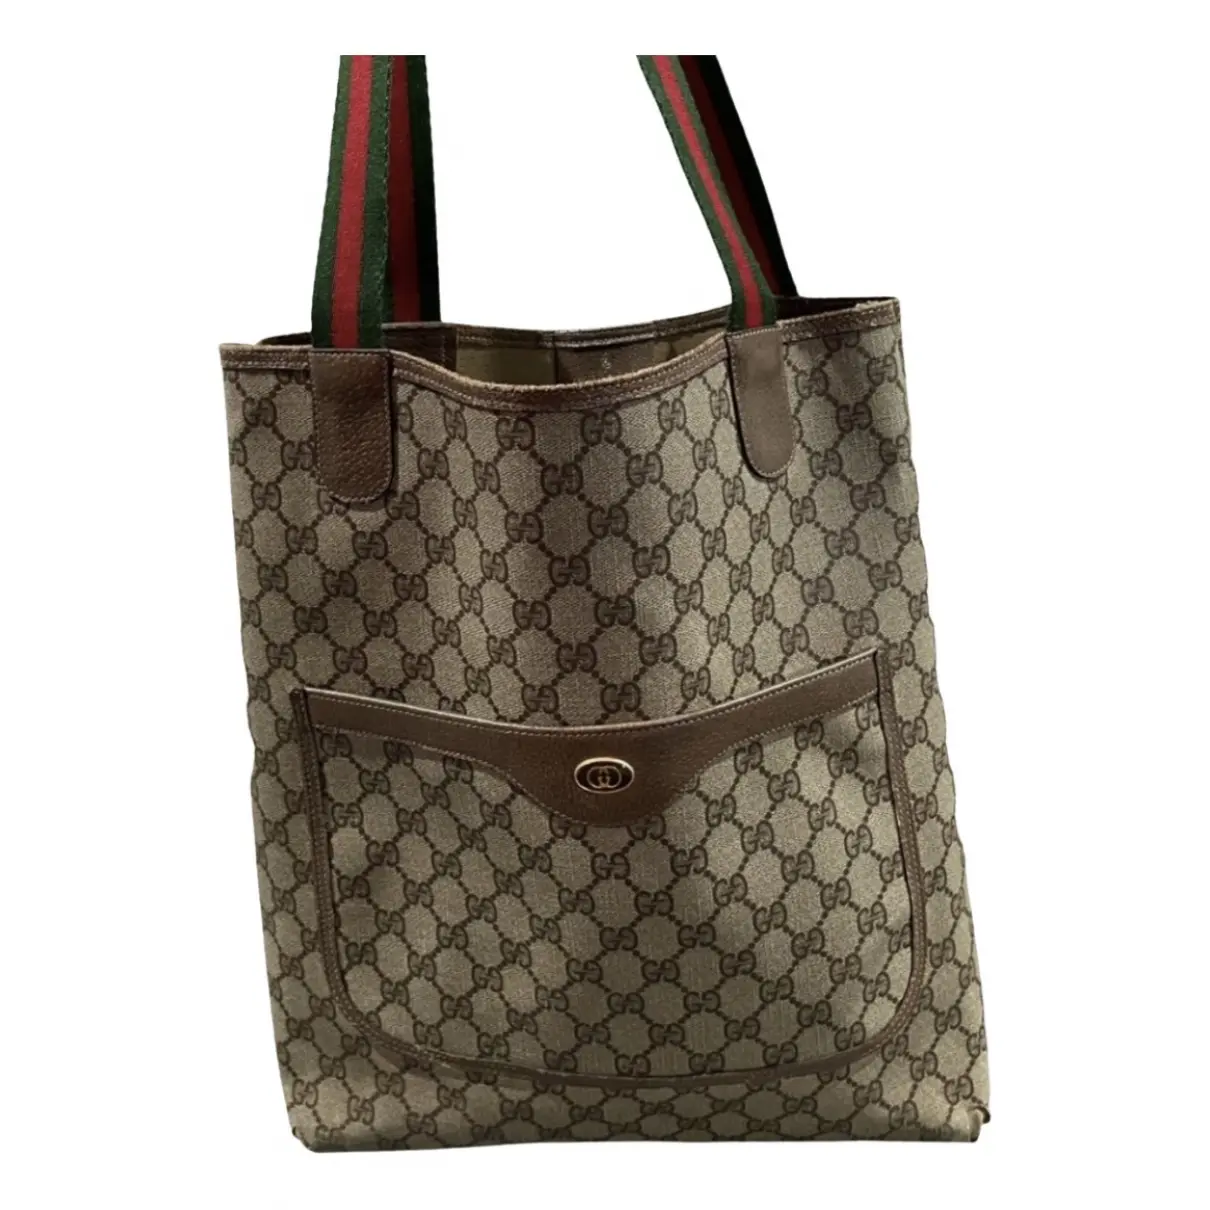 Bestiary tote leather tote